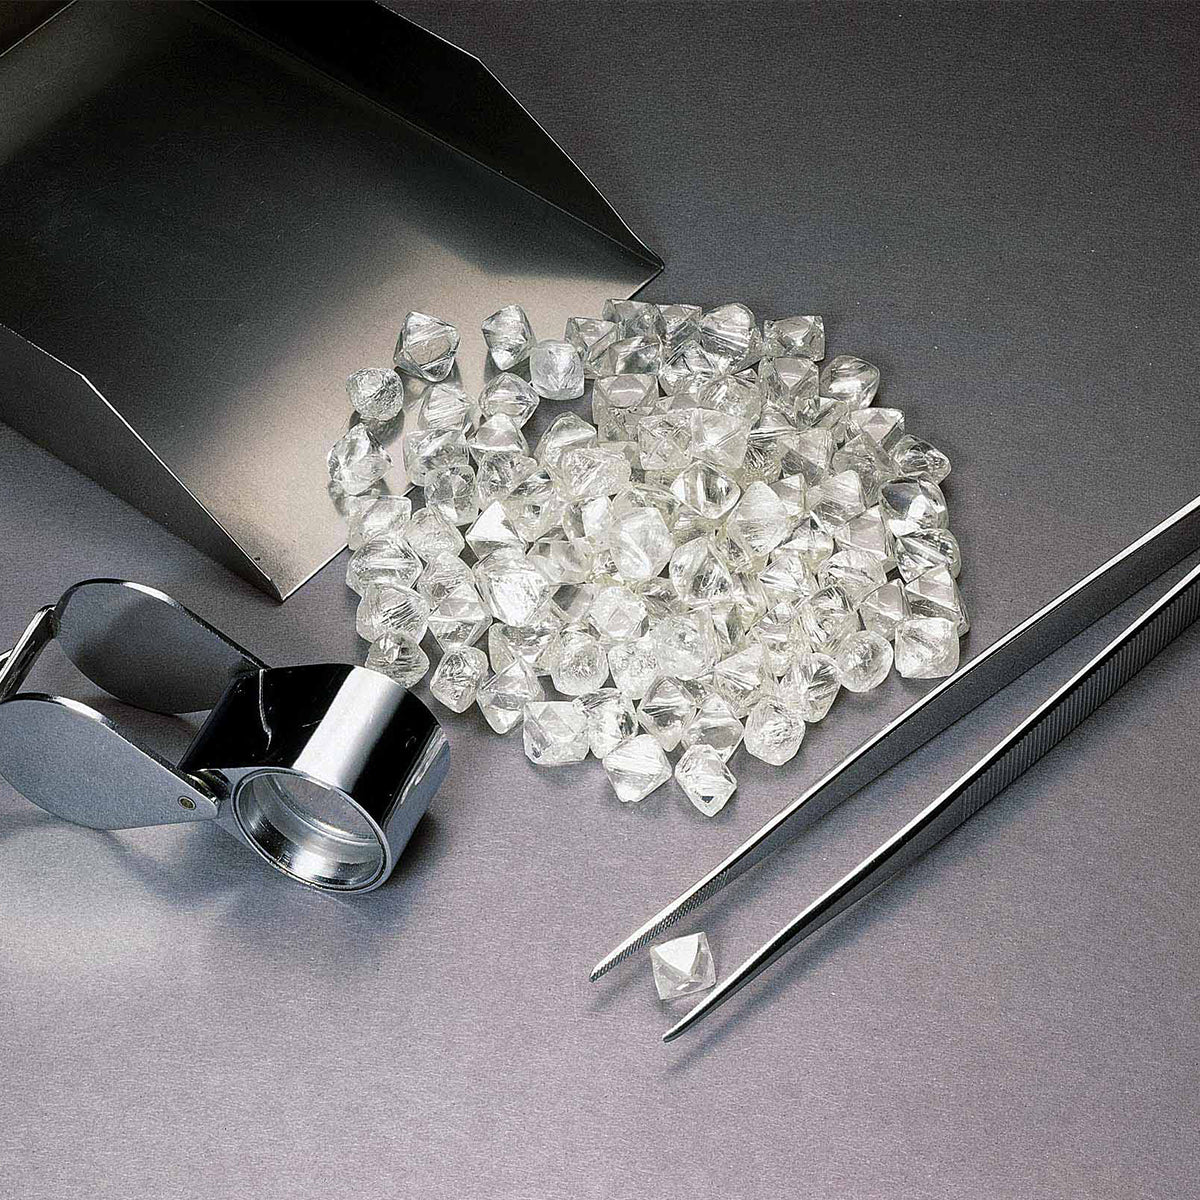 Shimansky Jewellery picking a rough diamond out of an assortment of diamonds